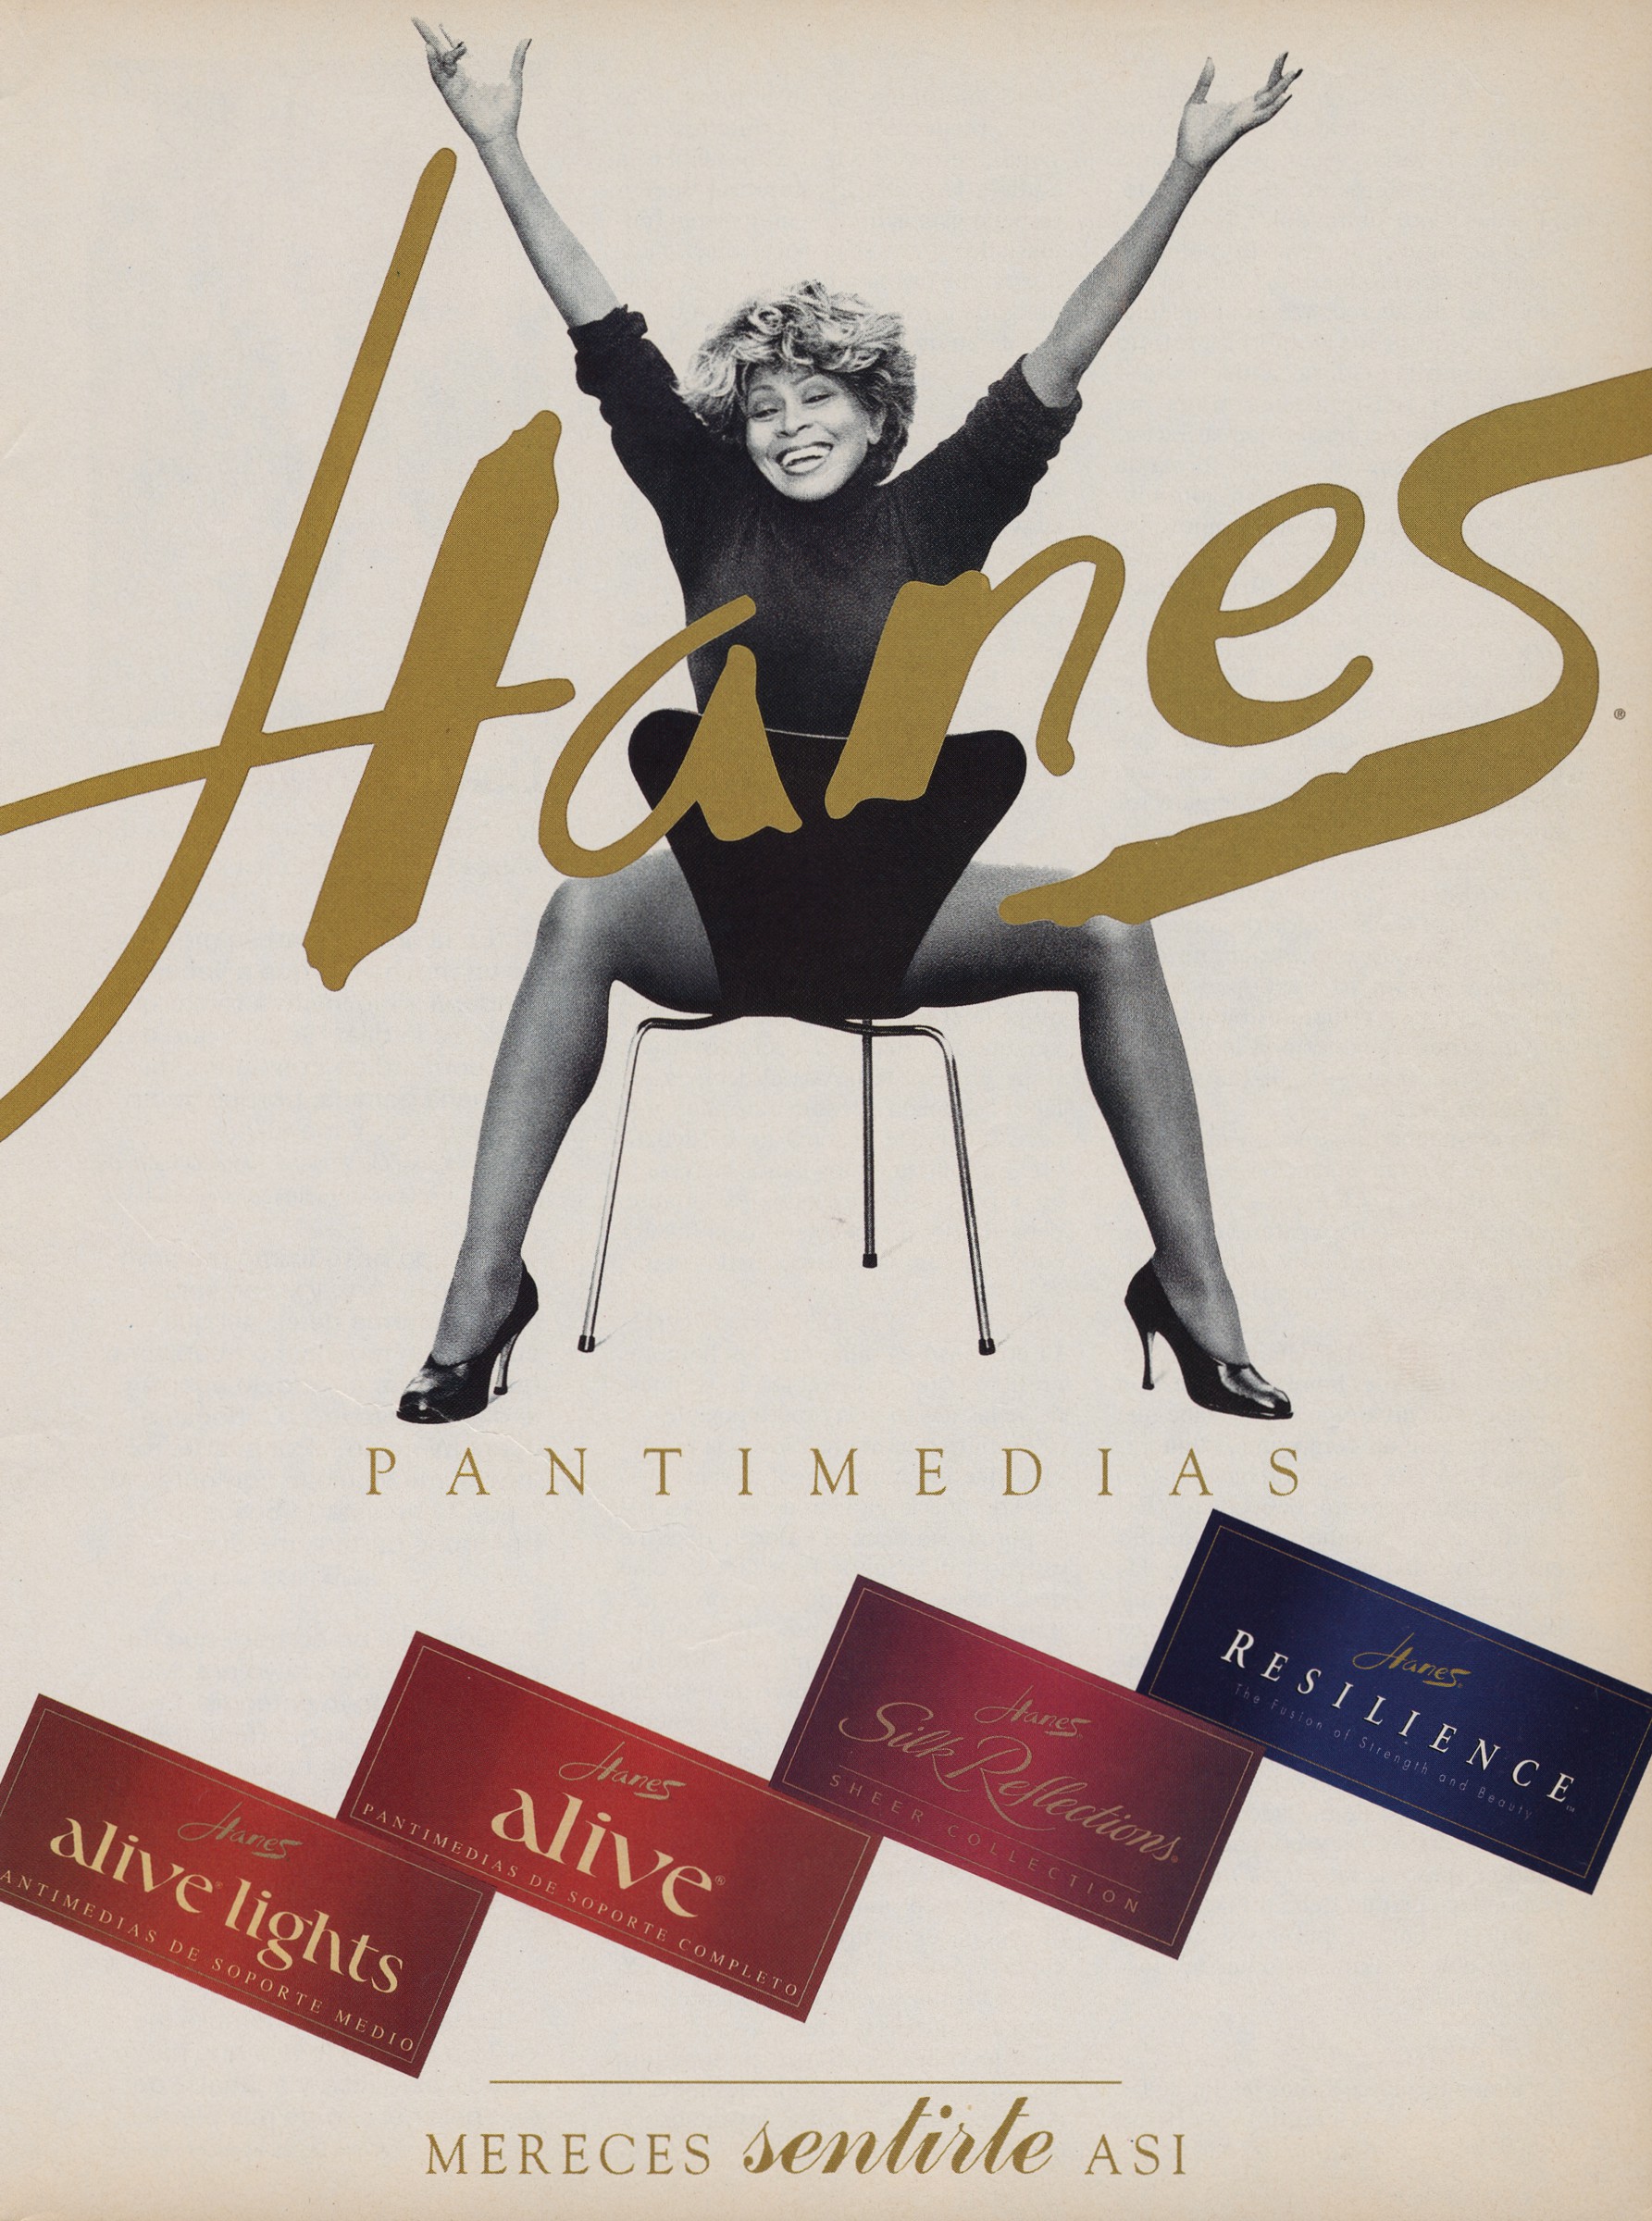 1980 Hanes Alive Support Pantyhose woman art gallery photo vintage print Ad